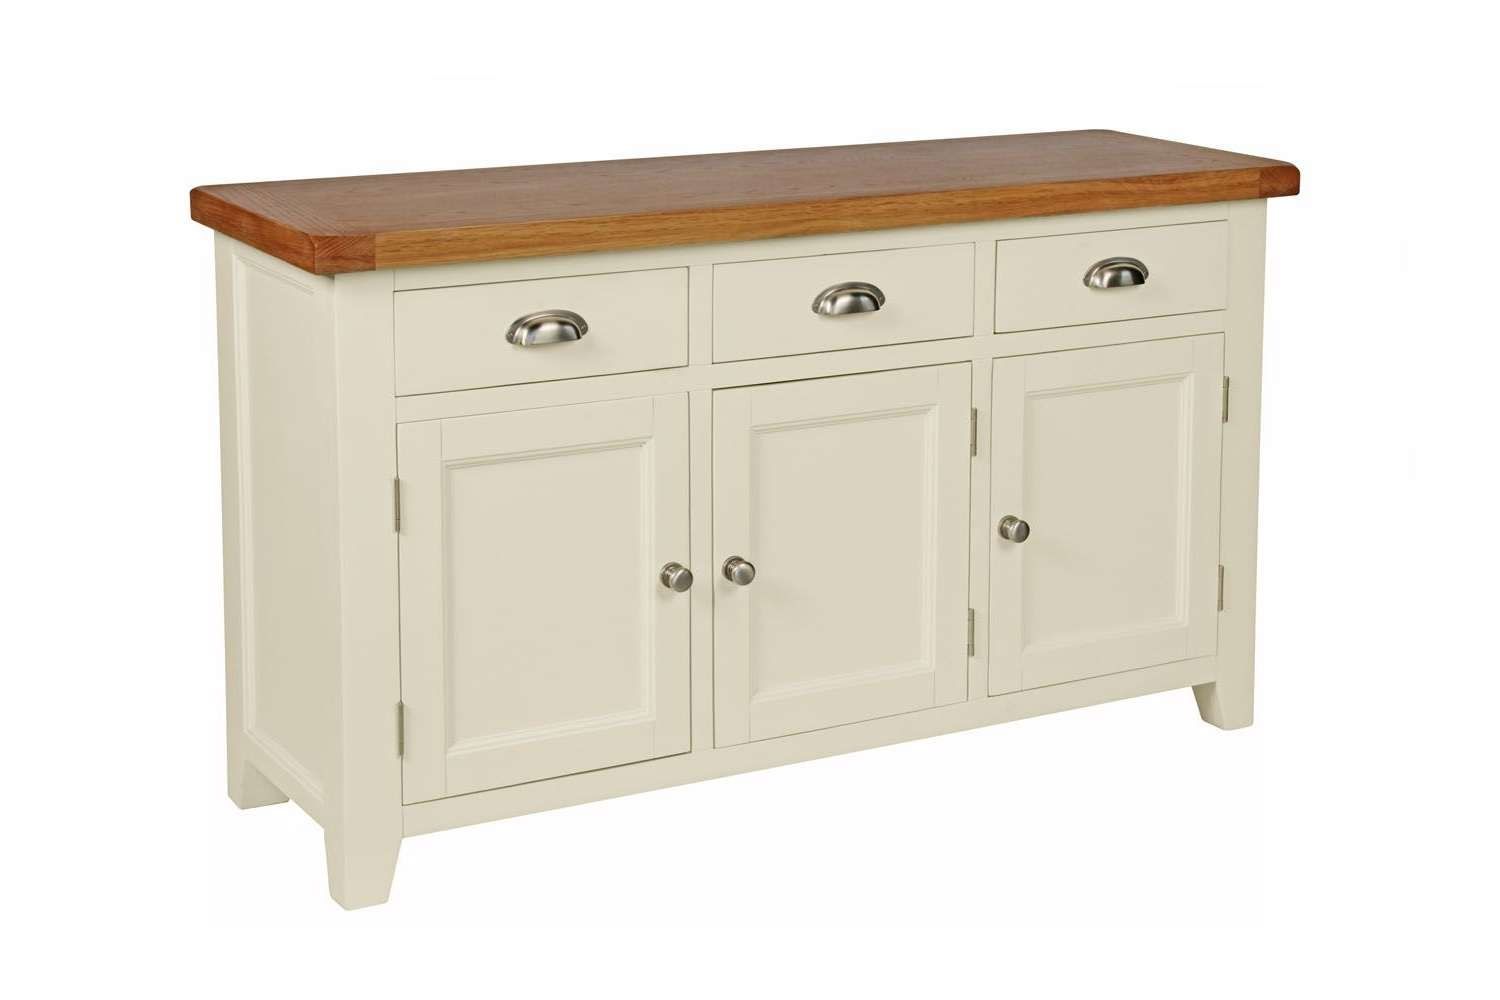 Country Cottage 140cm Cream Painted Large Oak Sideboard Pertaining To Cream And Brown Sideboards (View 1 of 20)